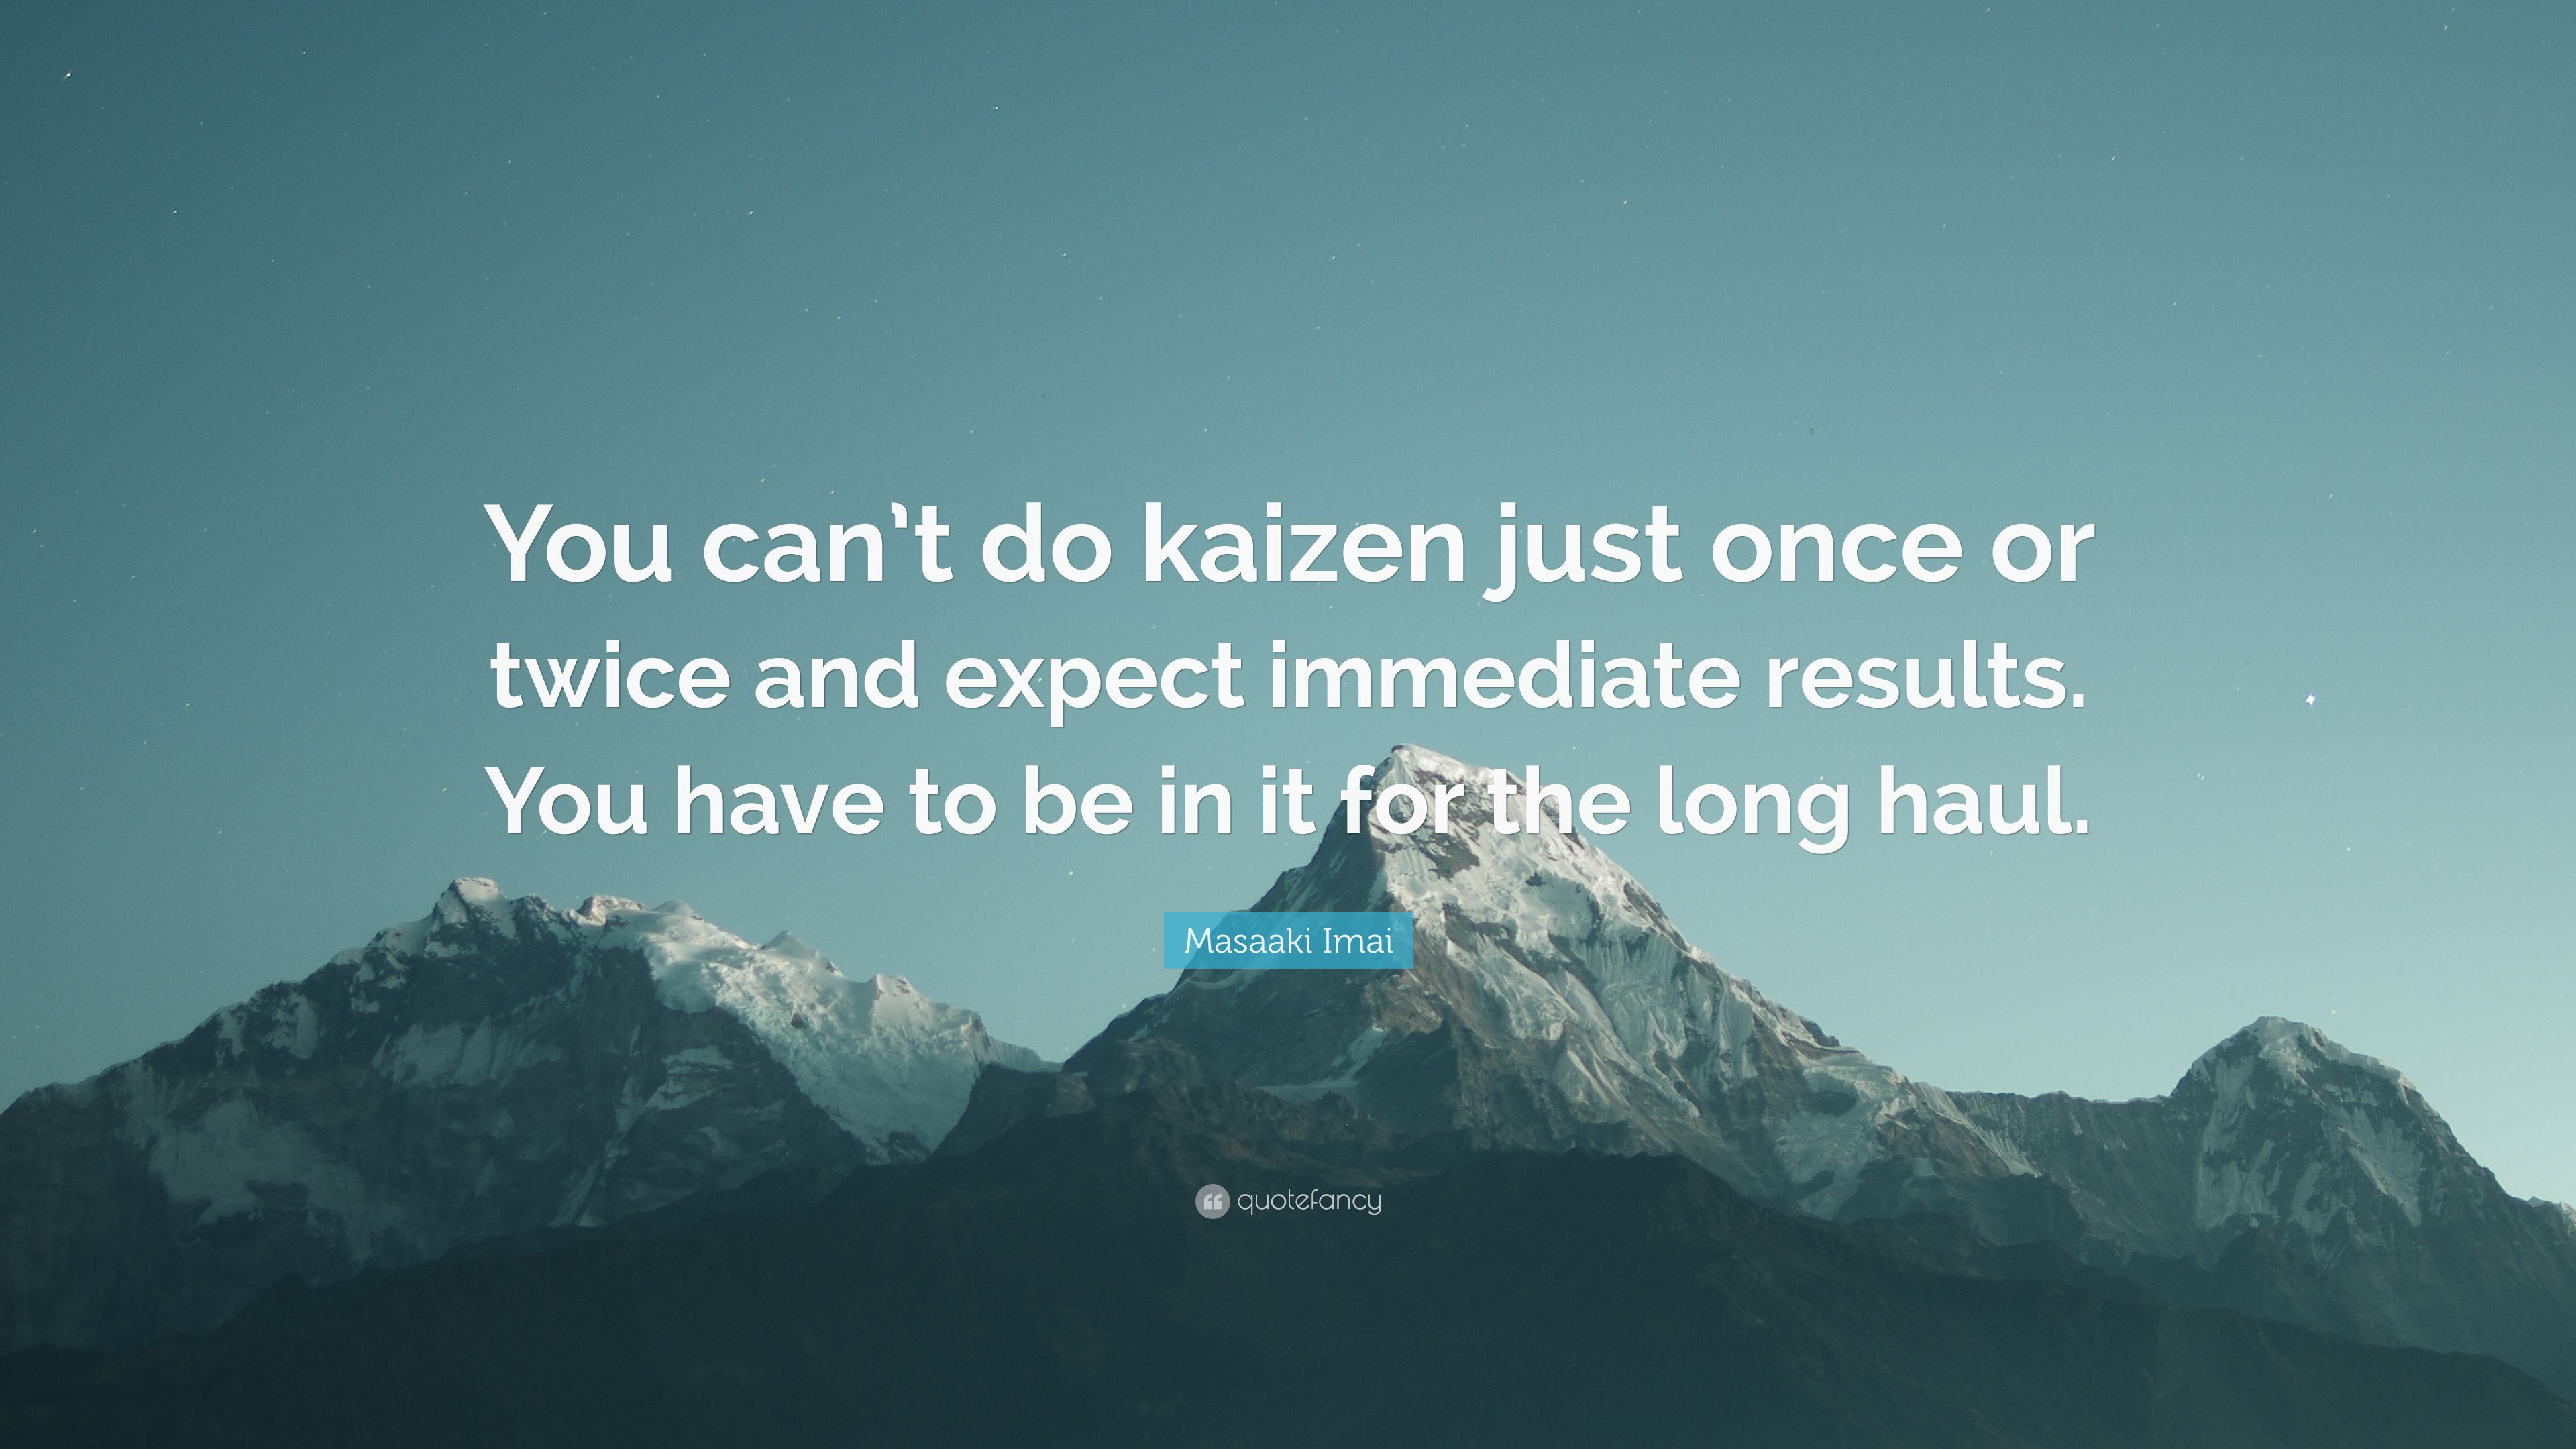 Masaaki Imai Quote: “You can't do kaizen just once or twice and expect immediate results. You have to be in it for the long haul.” (12 wallpaper)